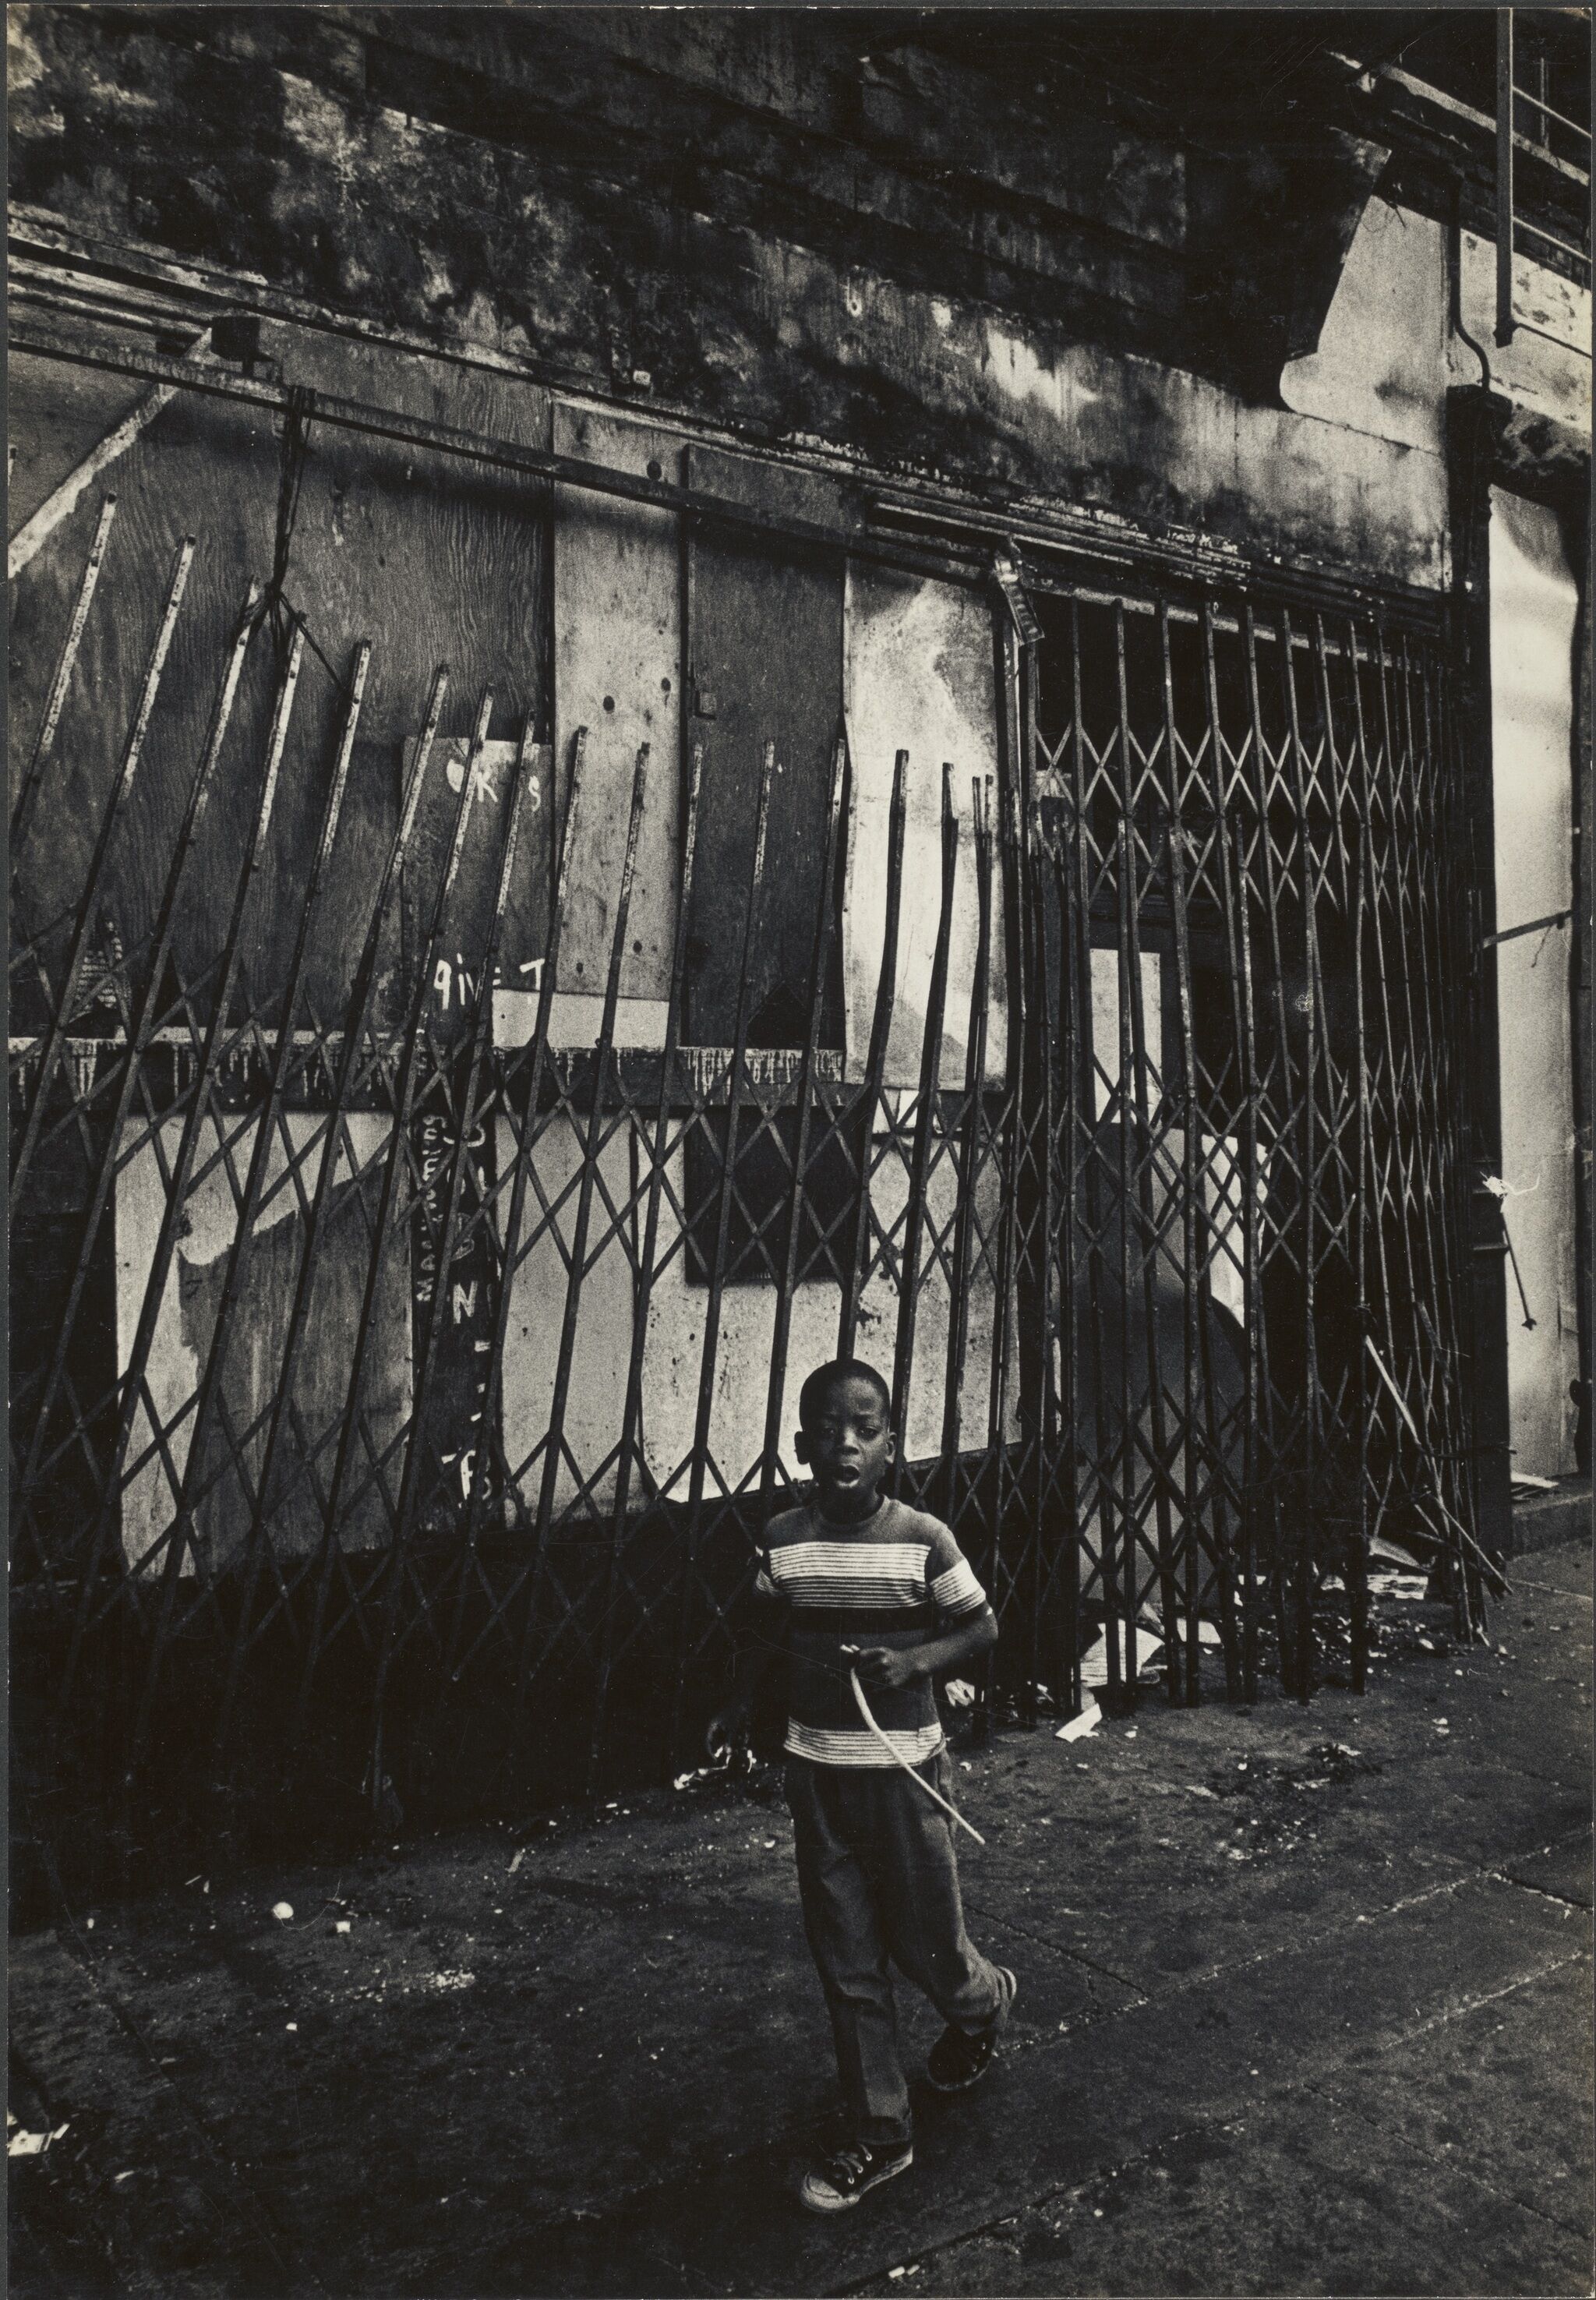 A boy in front of a tall gate.